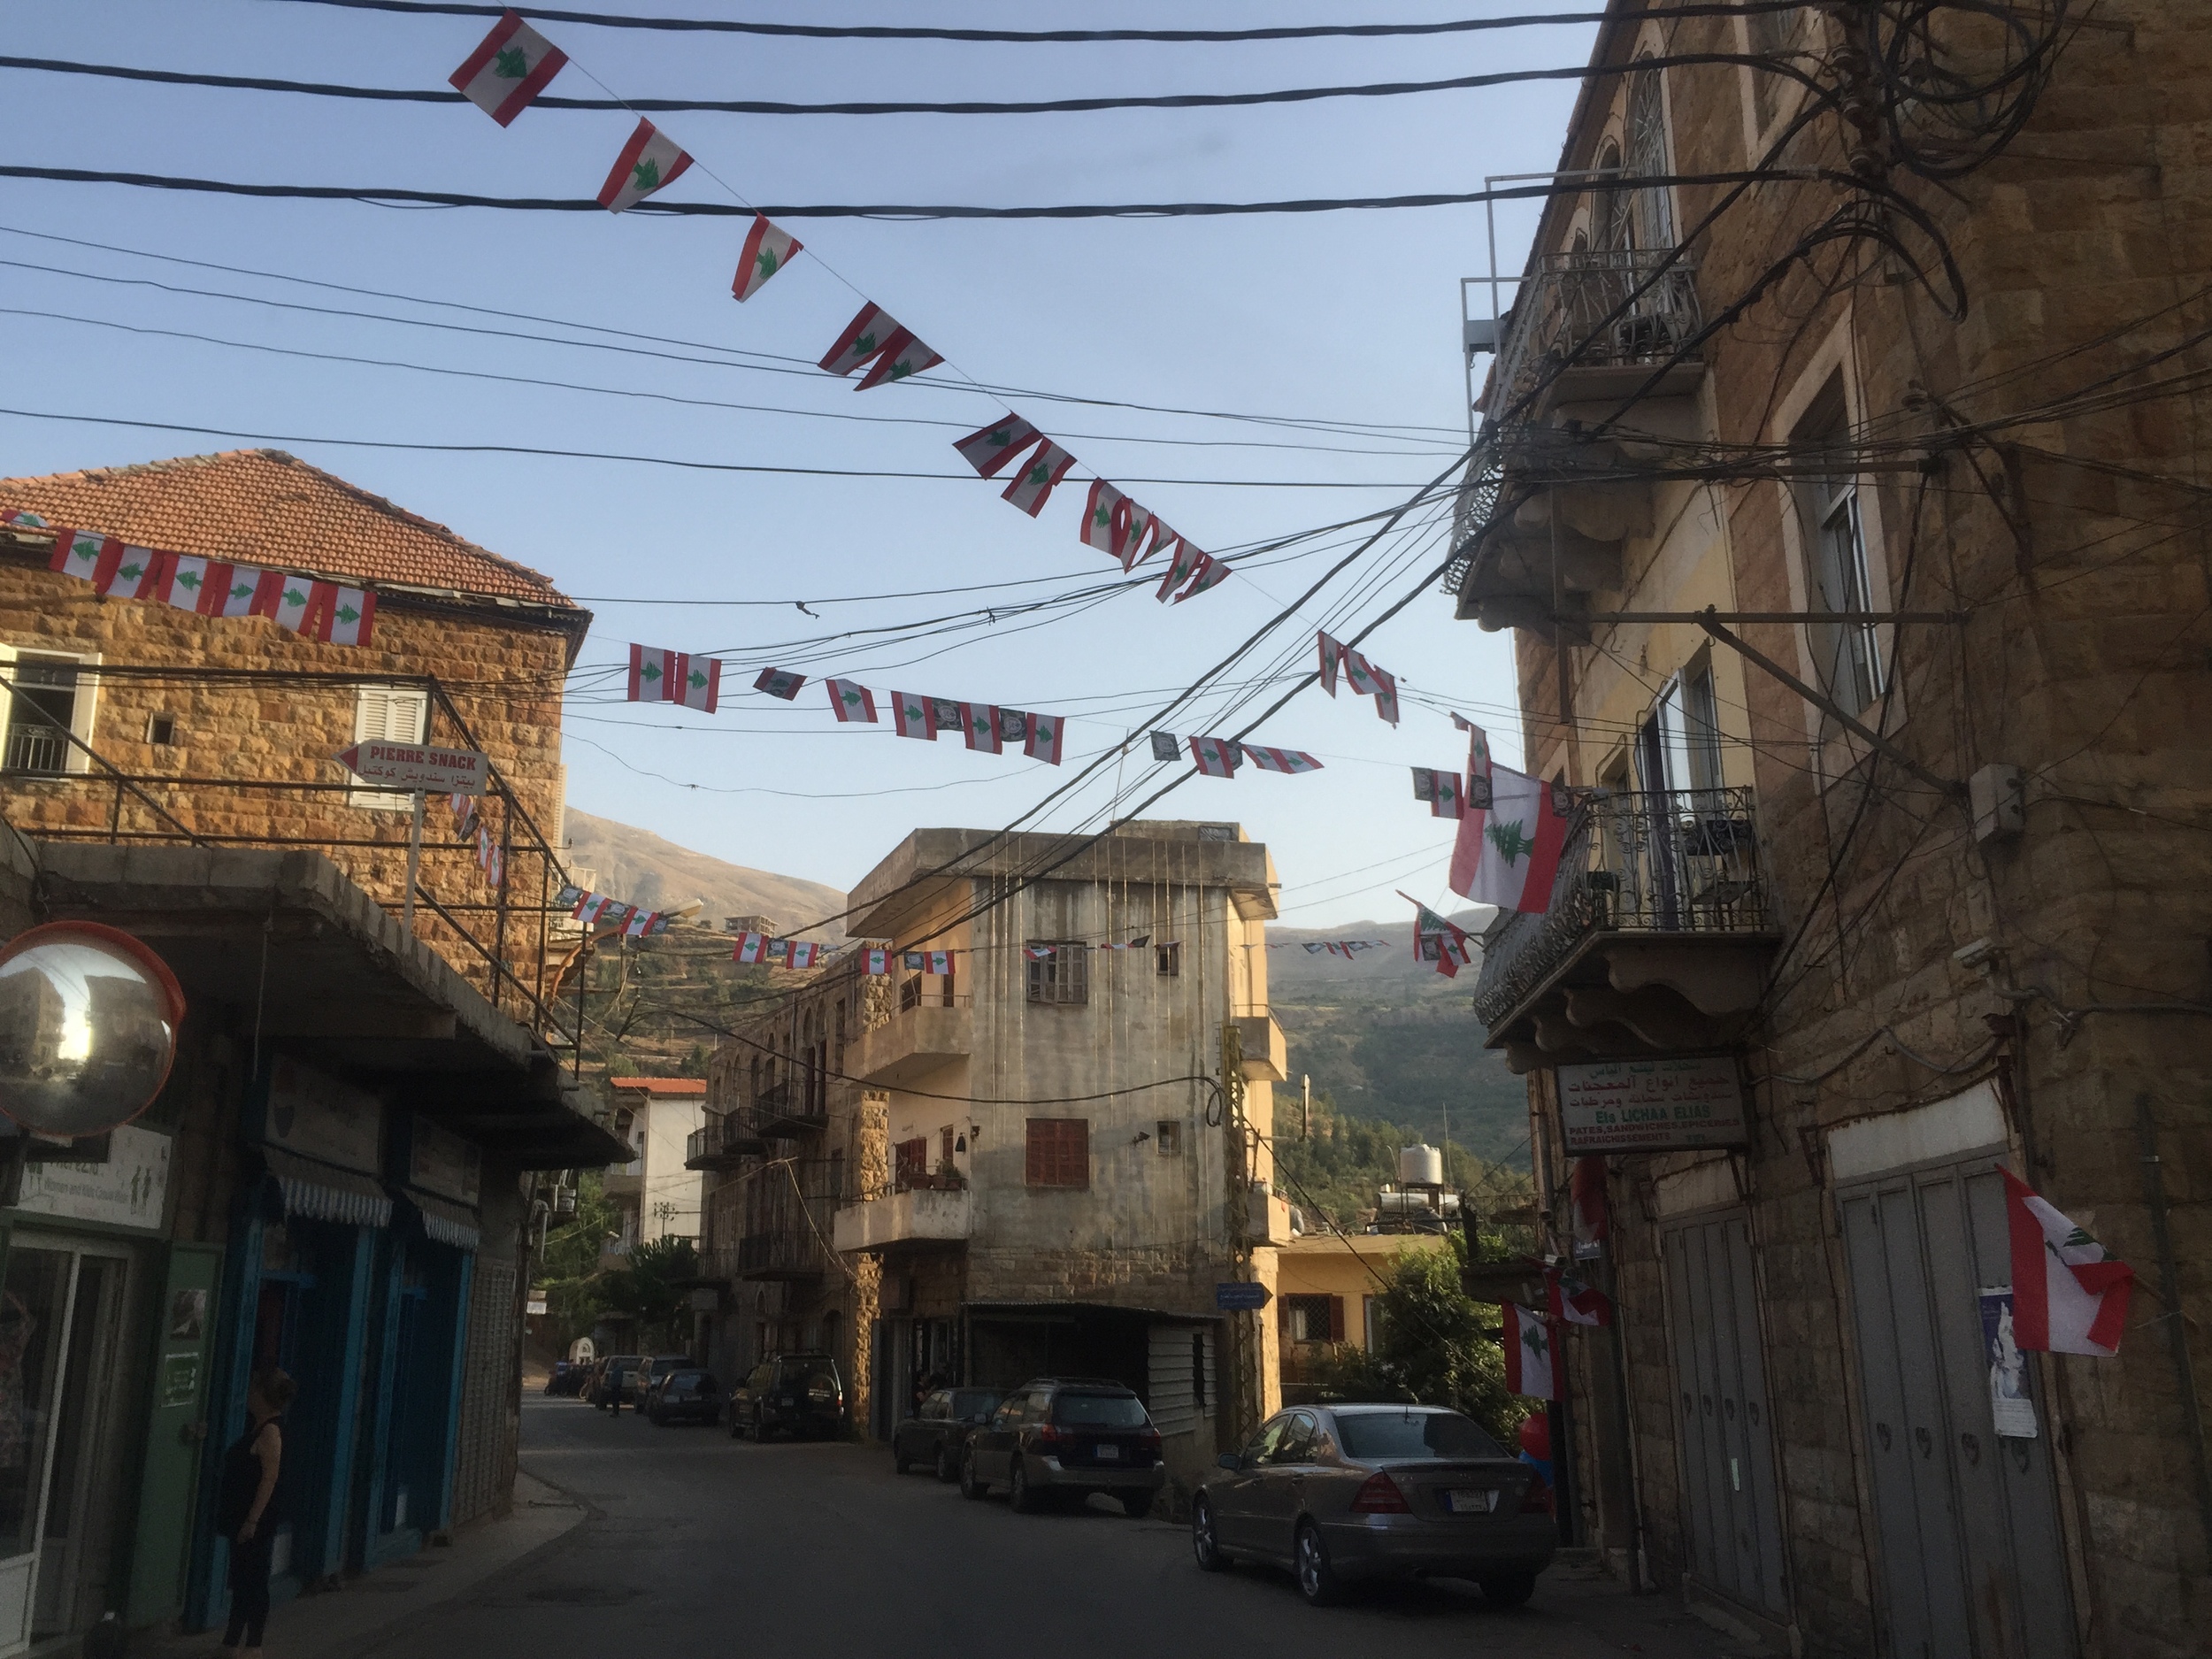   A small village in the mountains of Lebanon sports its patriotism with continuous lines of Lebanese flags. August, 2015.  